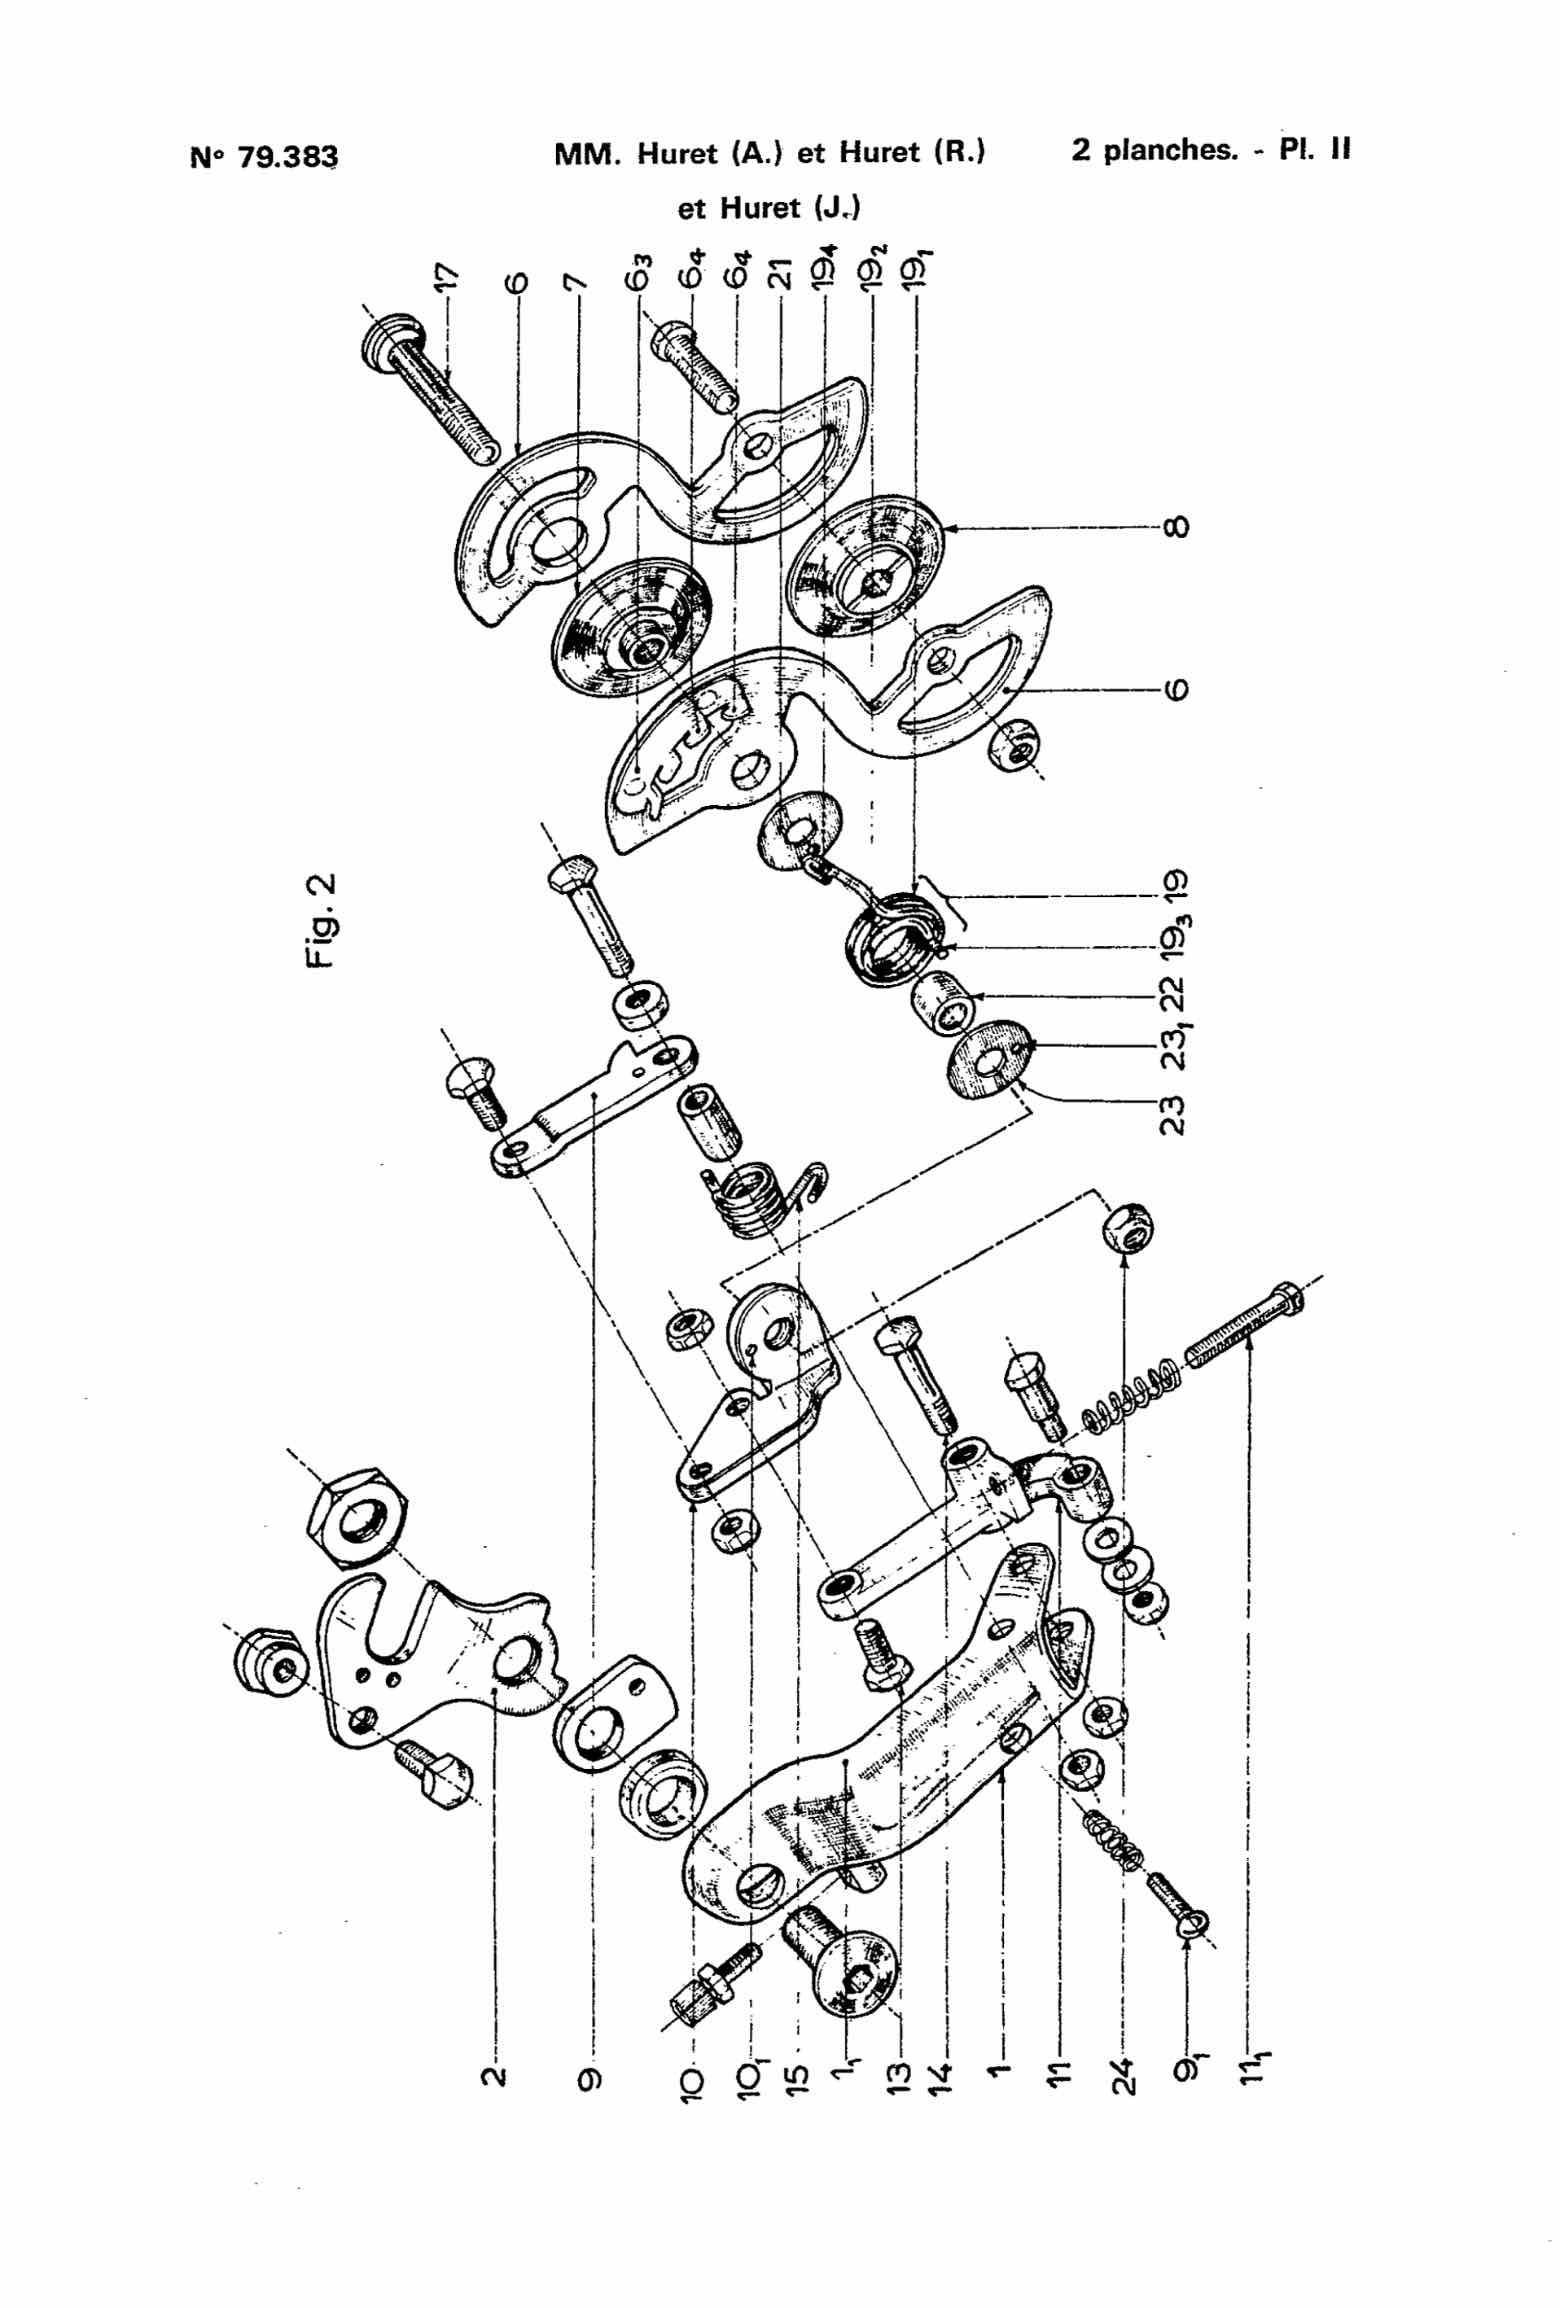 French Patent 1,204,027 addition 79,383 - Huret scan 4 main image